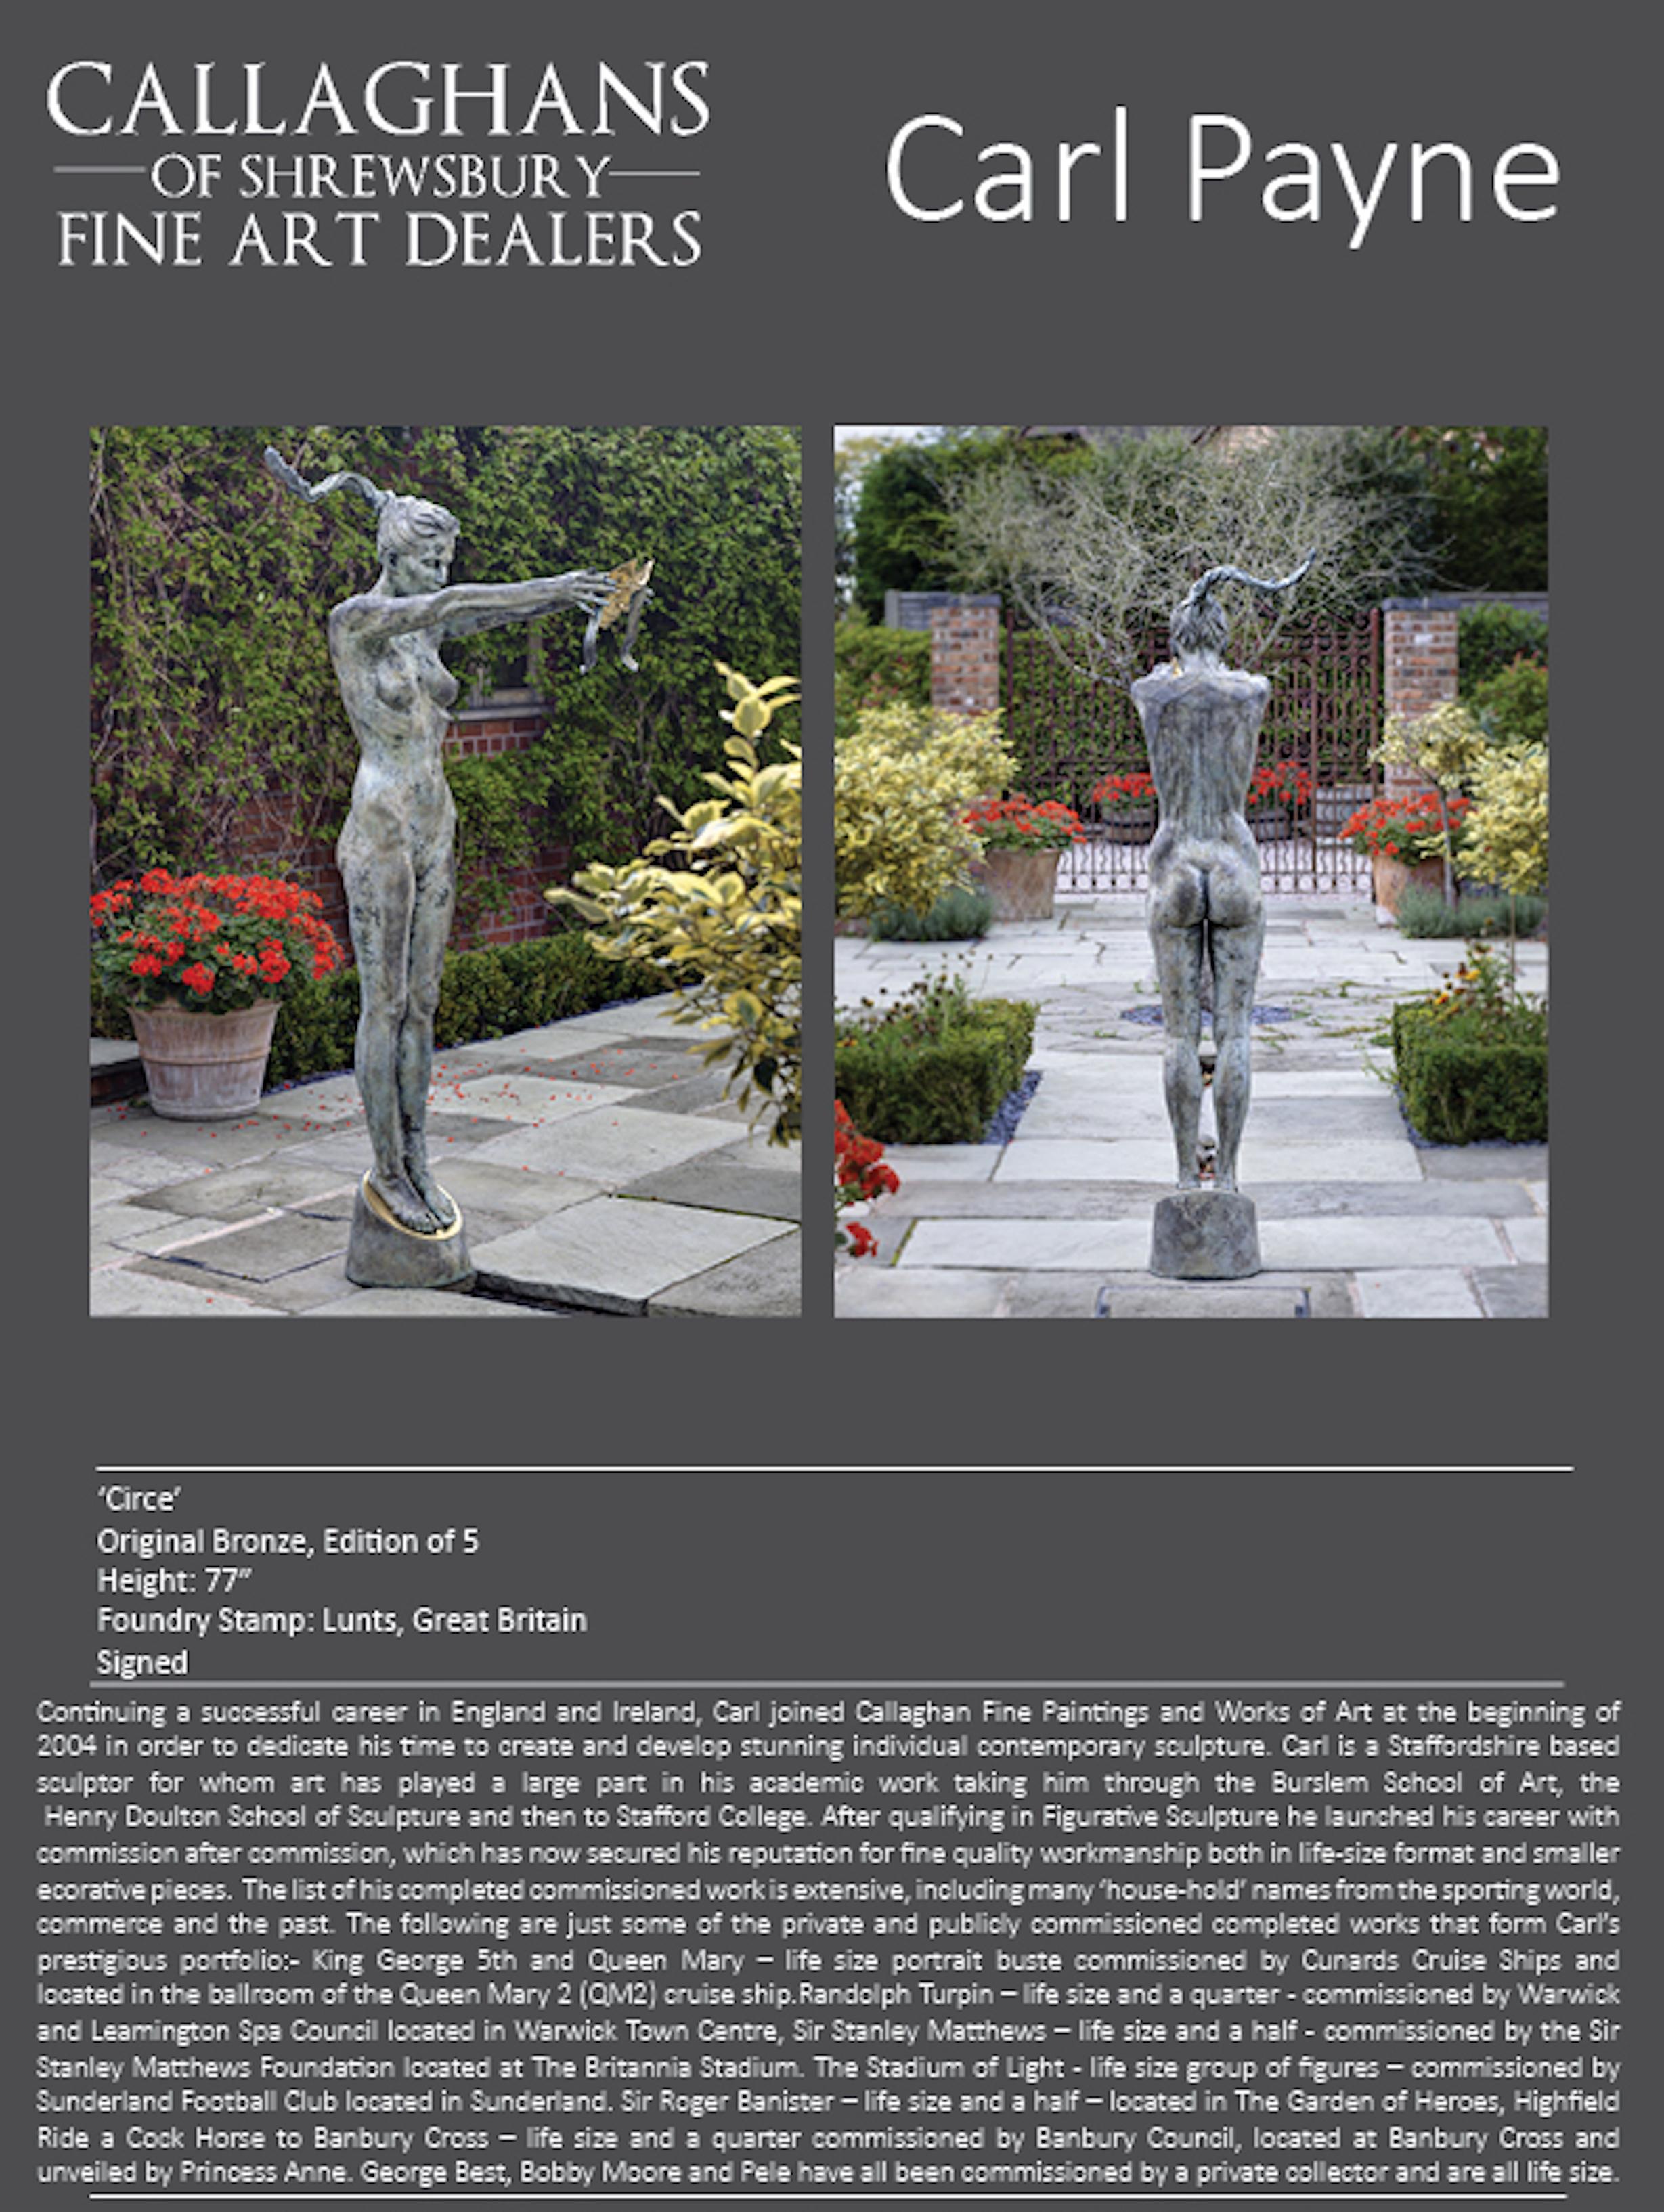 'Circe' The Goddess of Magic - Life-size Solid Bronze Nude Figure by Carl Payne For Sale 1